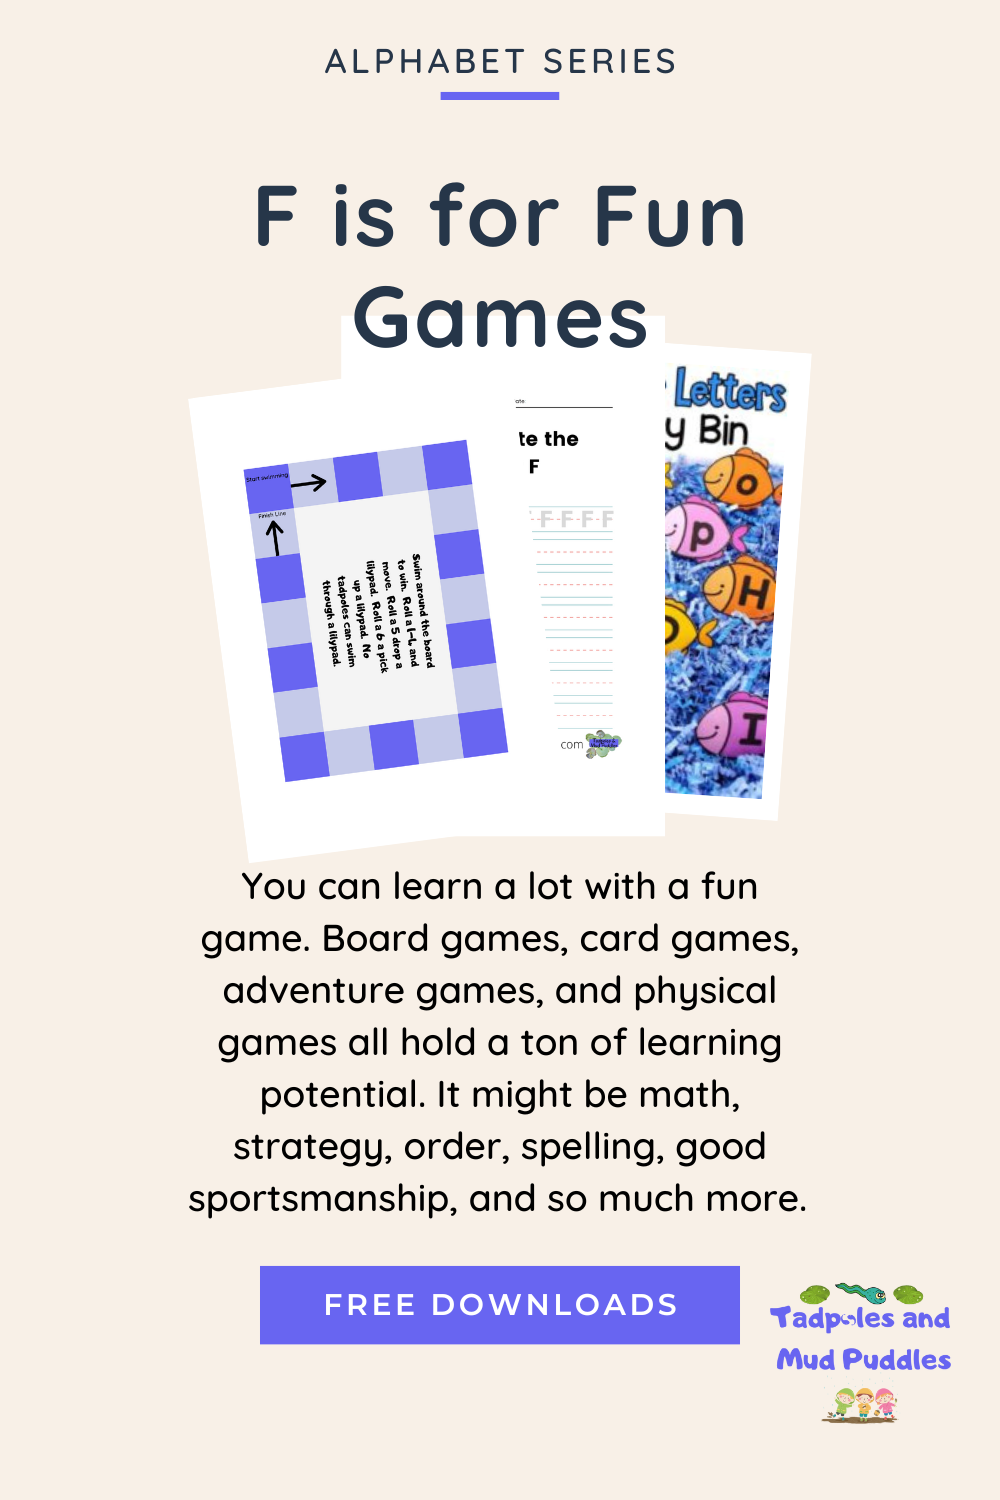 F is for fun games